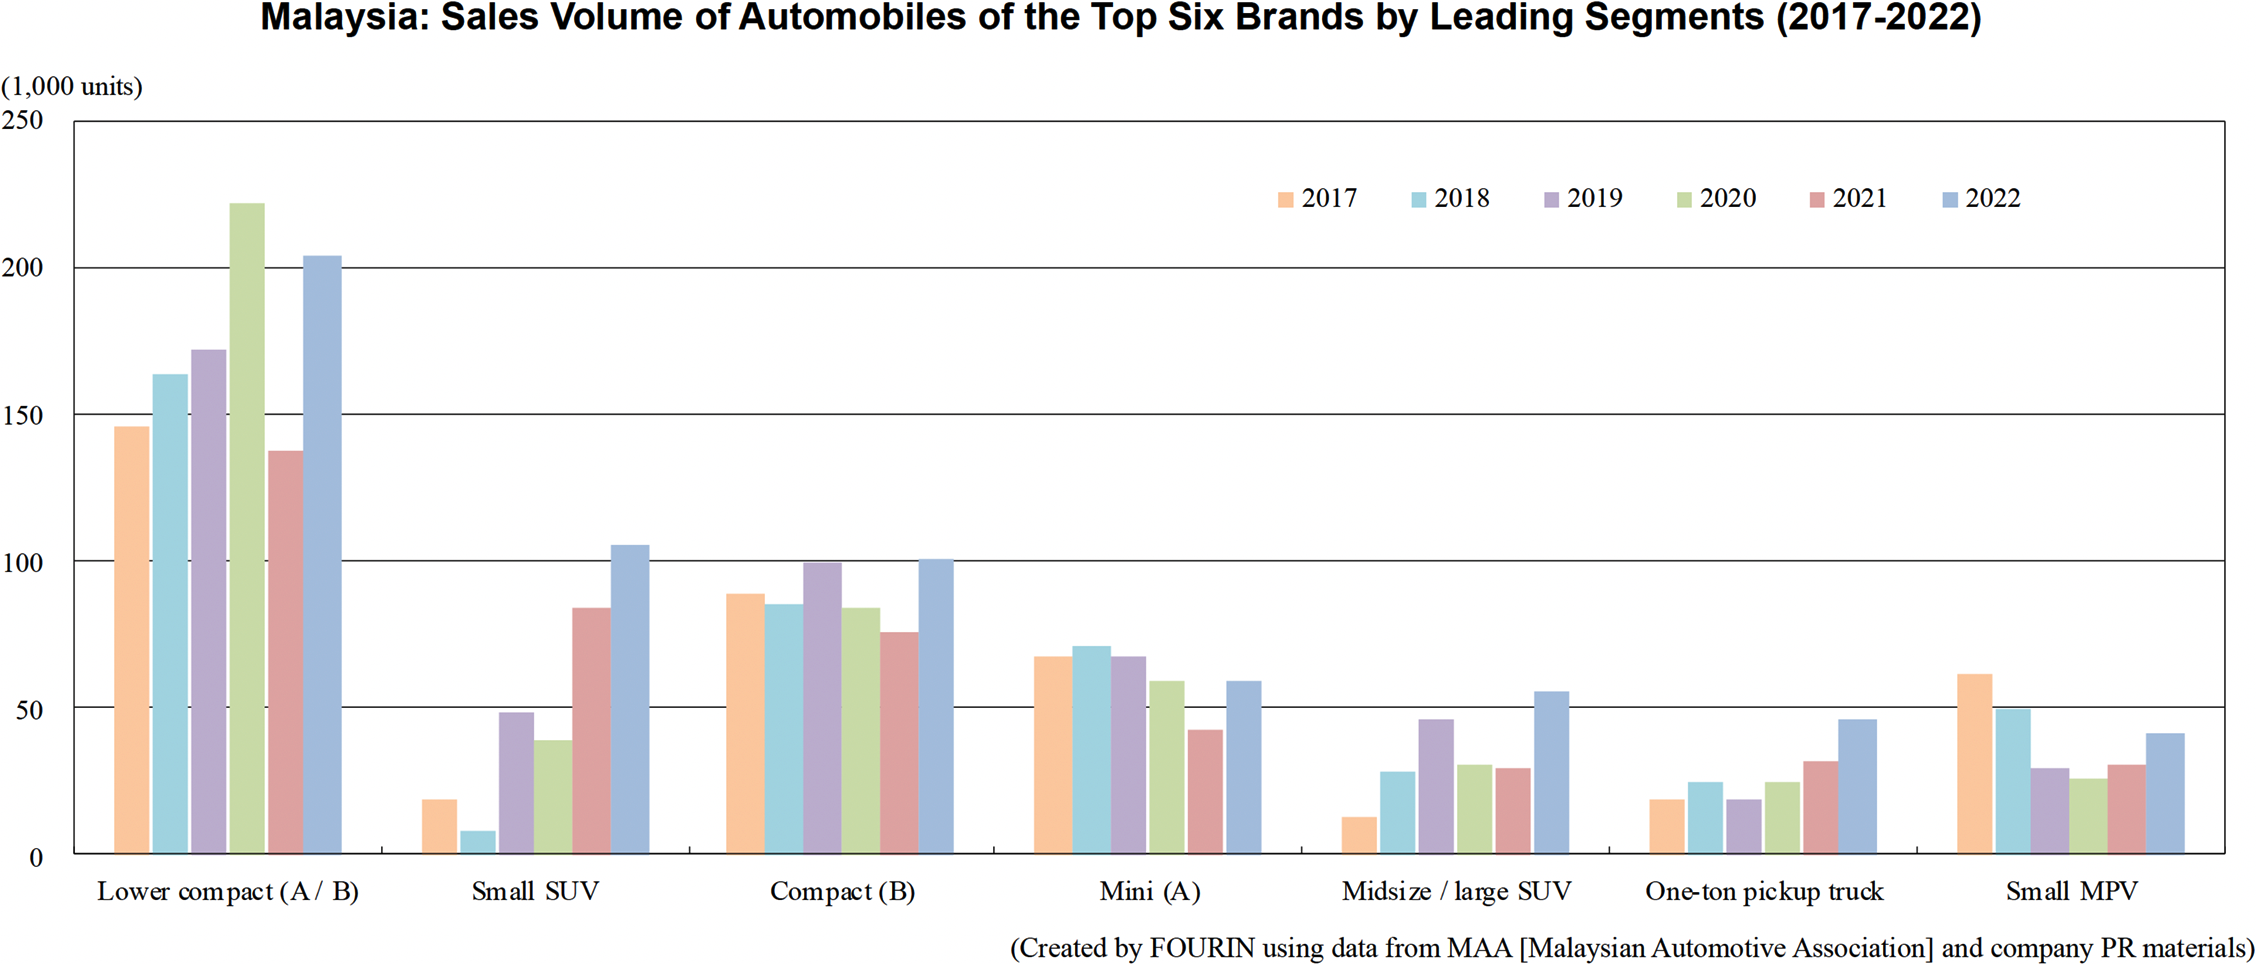 Malaysia: Sales Volume of Automobiles of the Top Six Brands by Leading Segments (2017-2022)